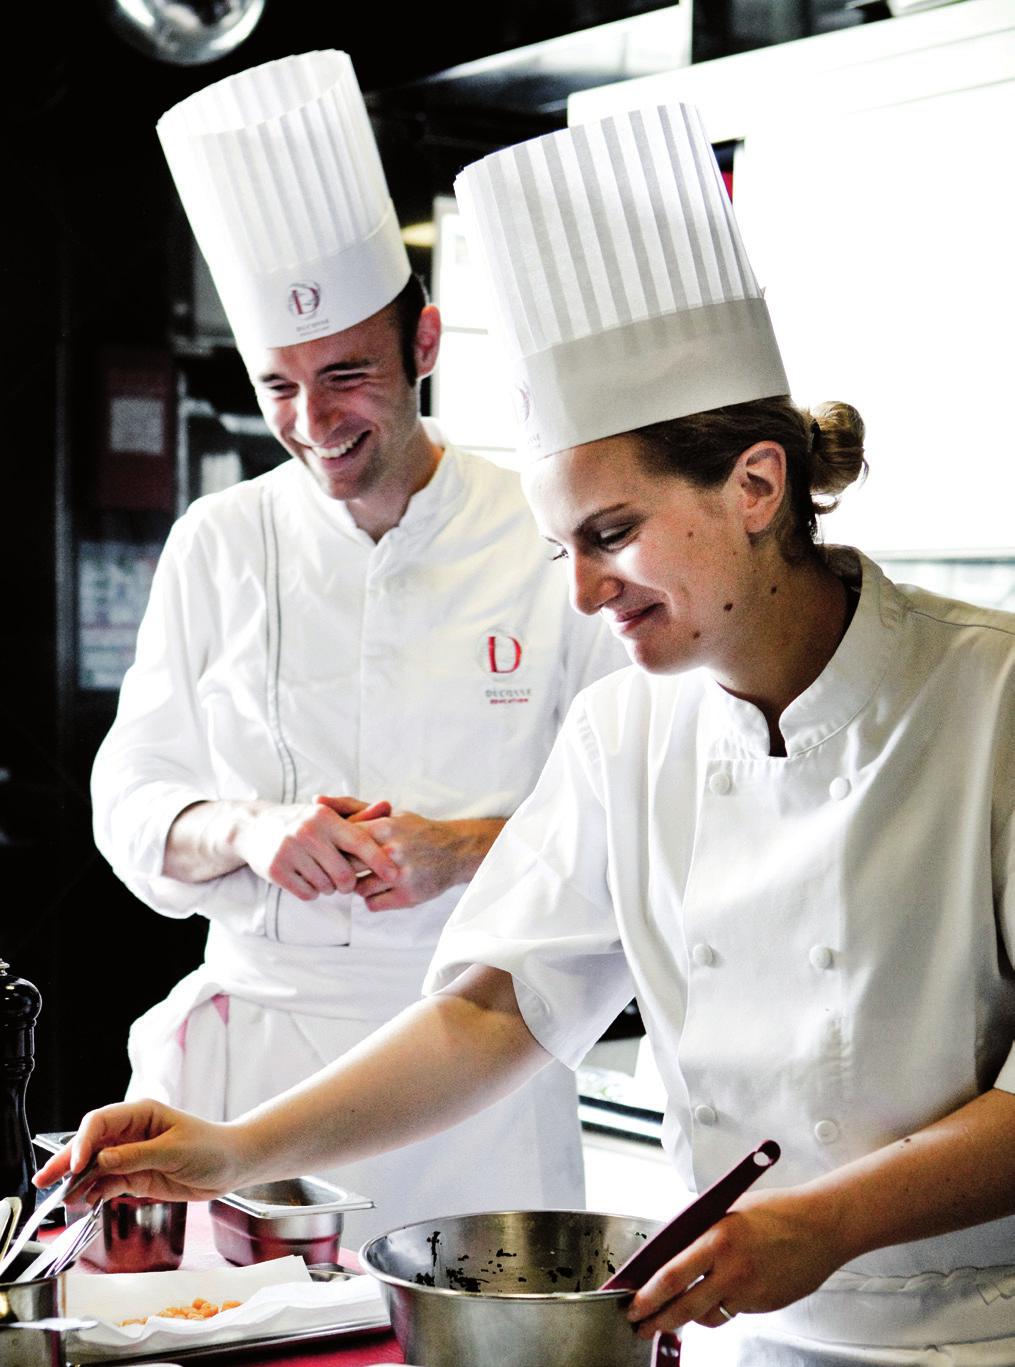 Acquire the highest level of expertise for every specialty in the professional kitchen, from cold kitchen preparations to advanced culinary techniques applied to different catering concepts.